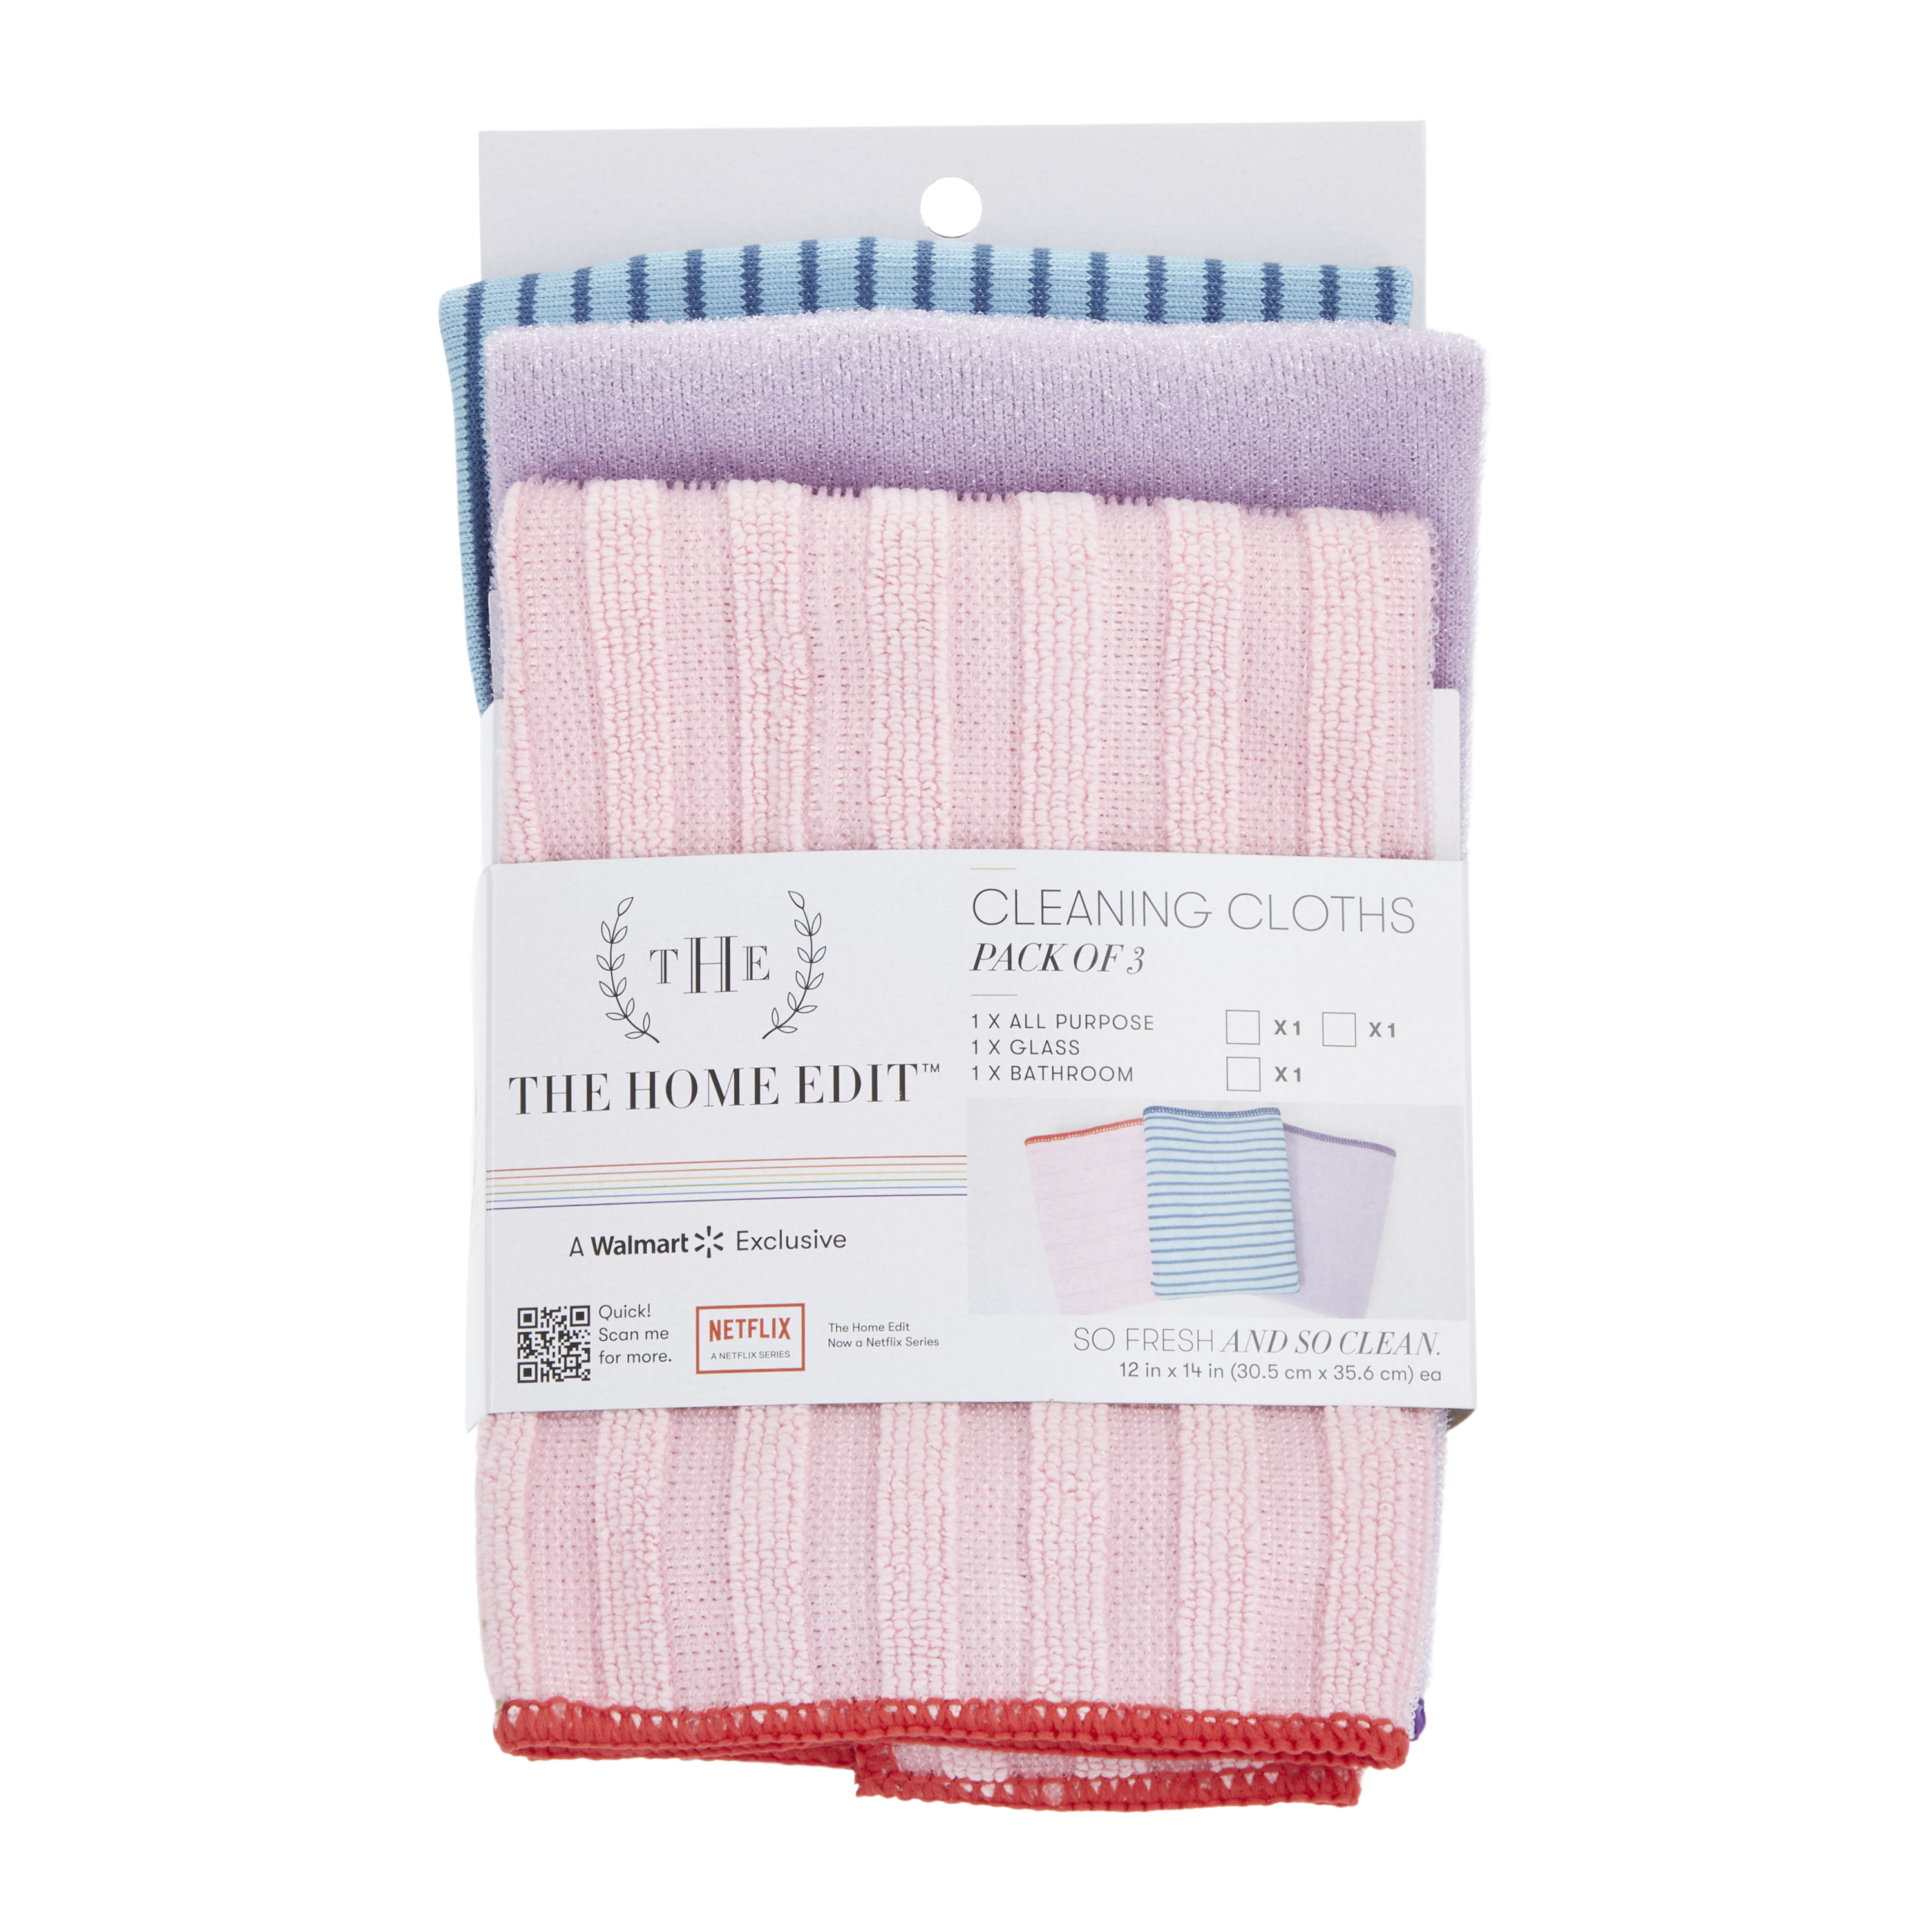 The Home Edit Multi Cleaning Cloth Set, 3-Piece - image 1 of 7